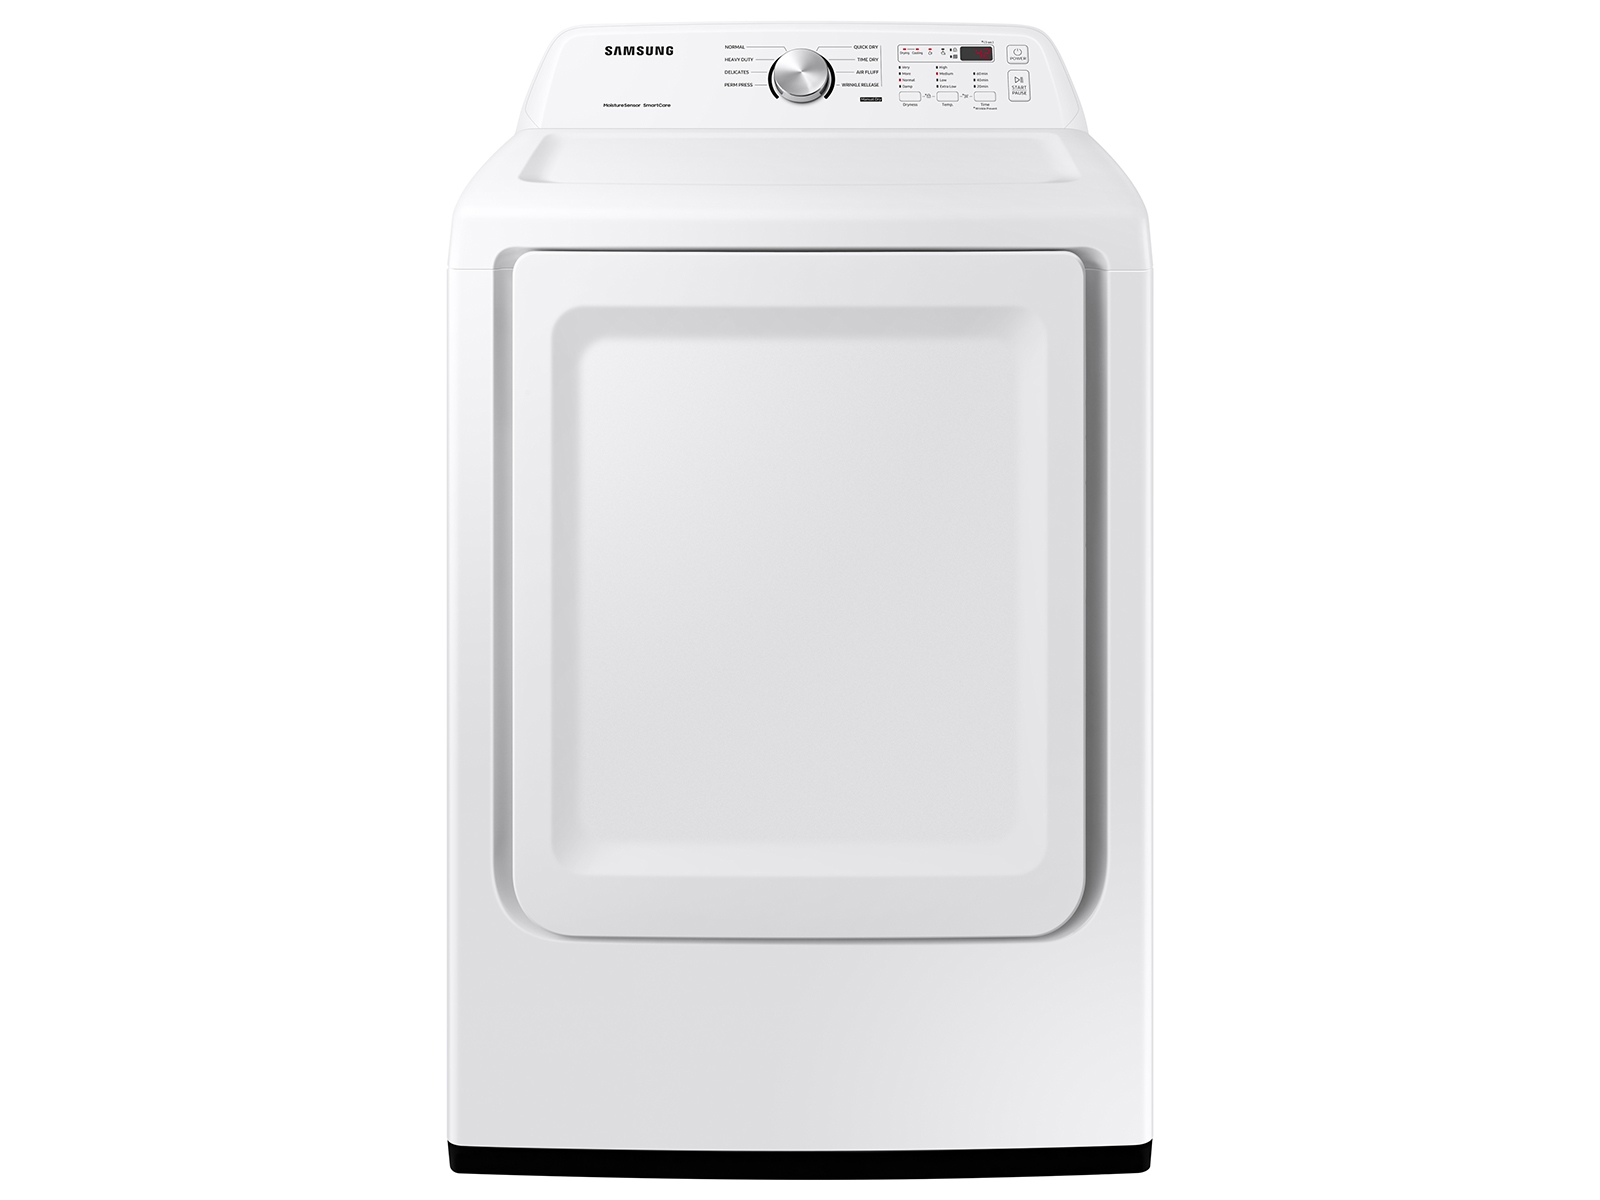 Samsung 7.2 cu. ft. Gas Dryer with Sensor Dry in White (DVG45T3200W/A3)